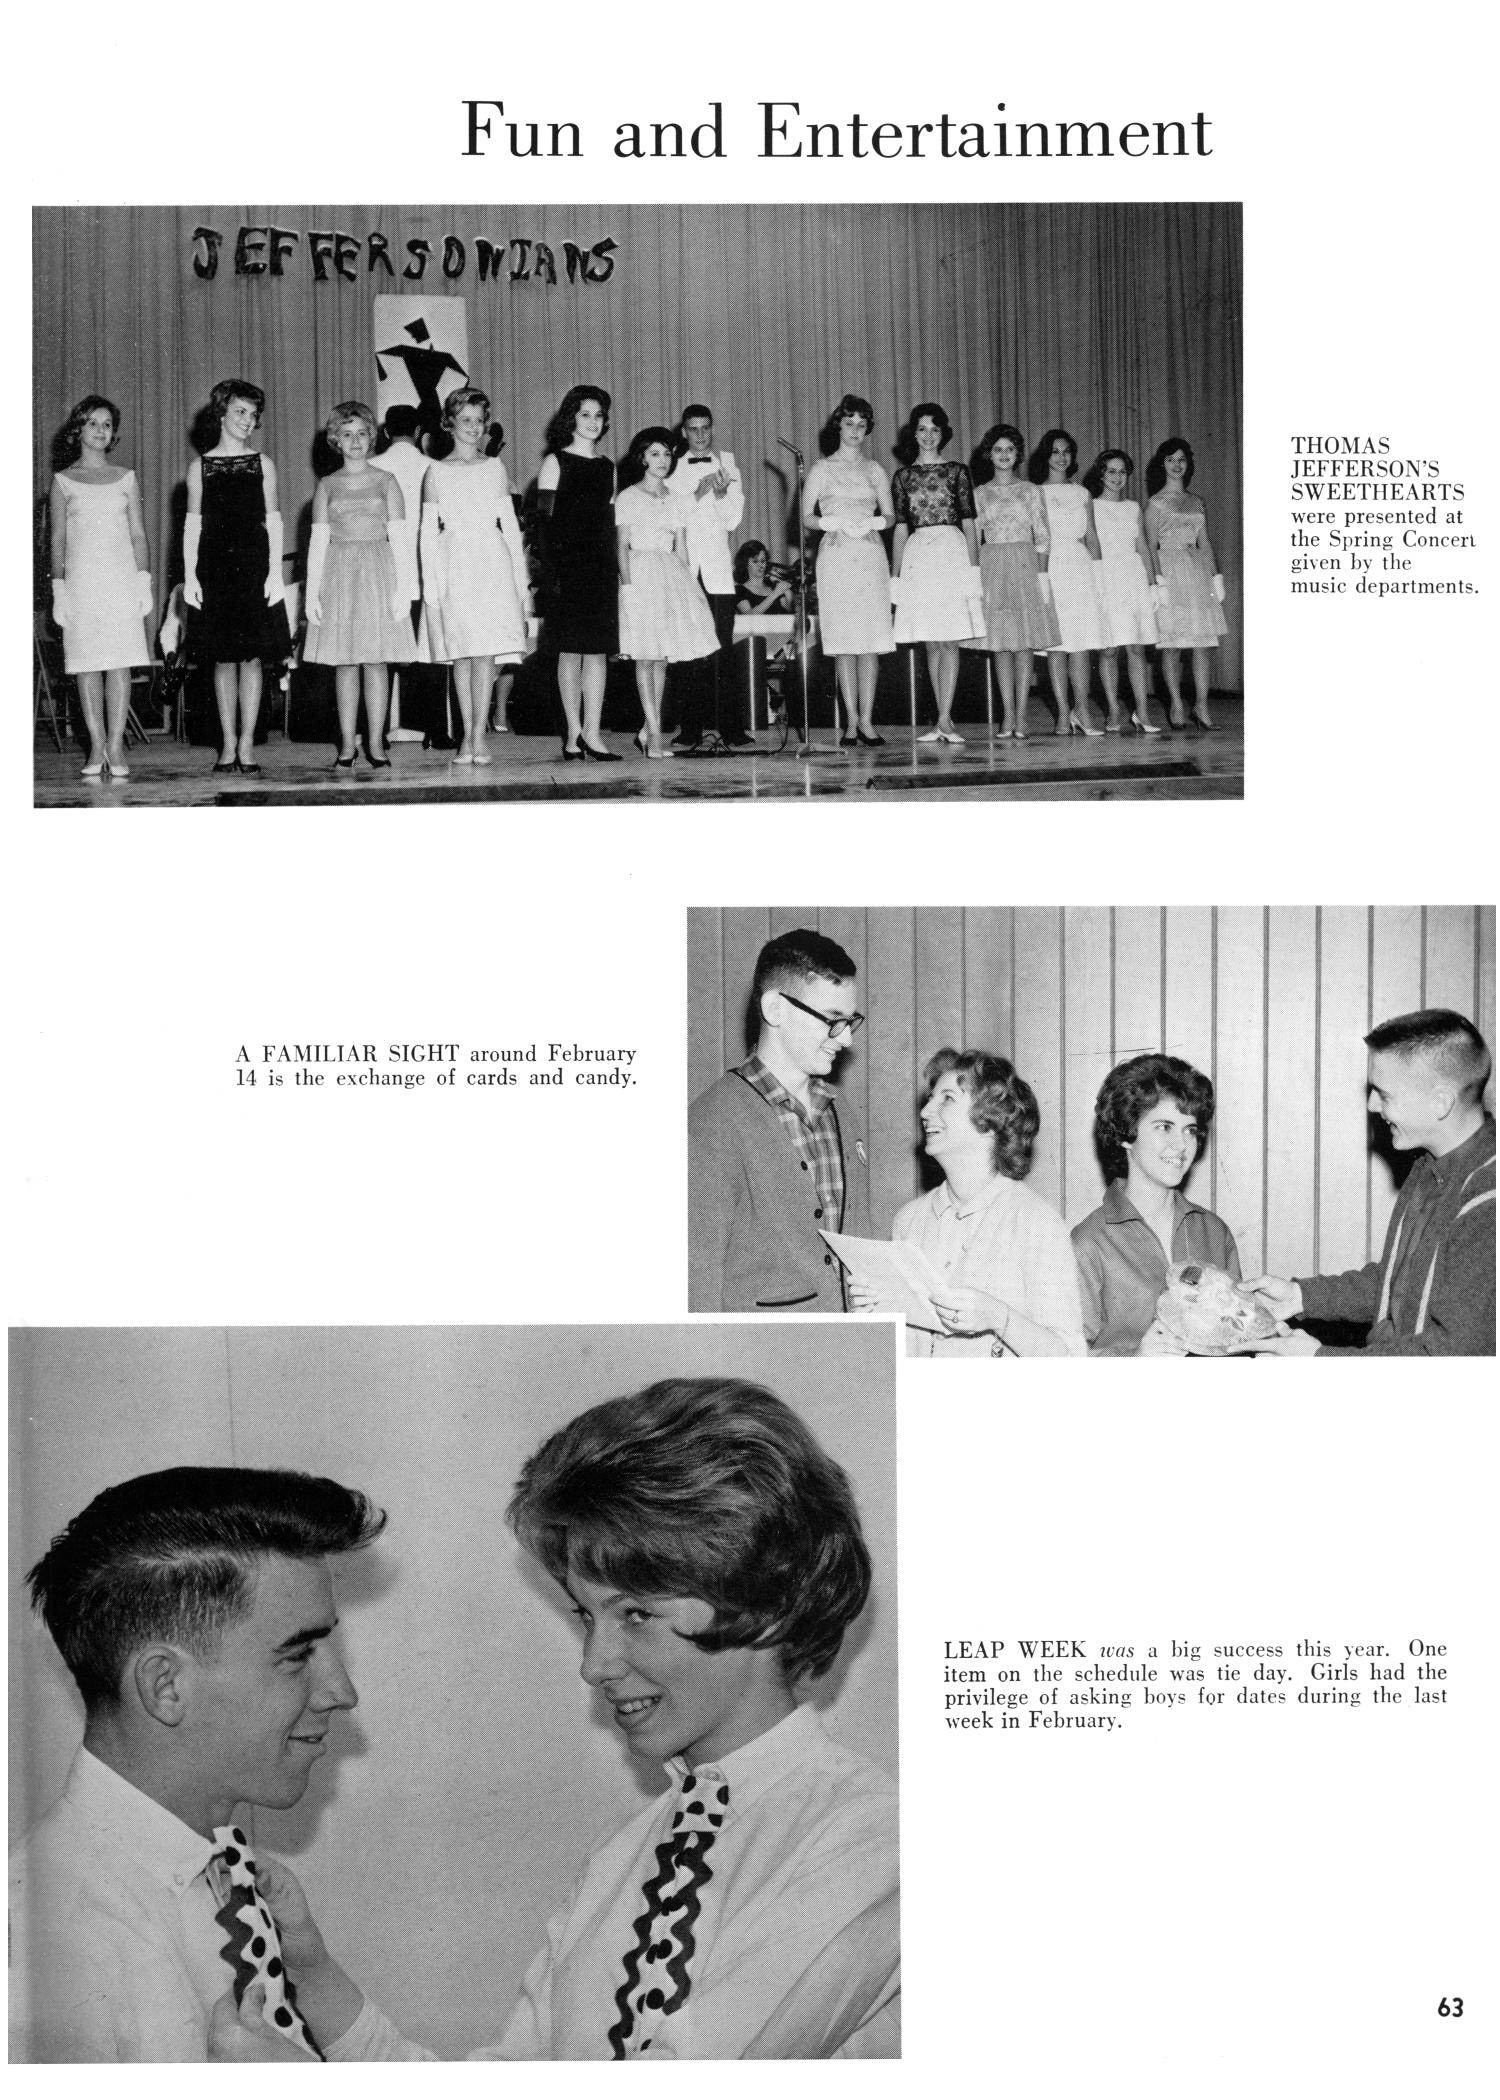 The Yellow Jacket, Yearbook of Thomas Jefferson High School, 1964
                                                
                                                    63
                                                